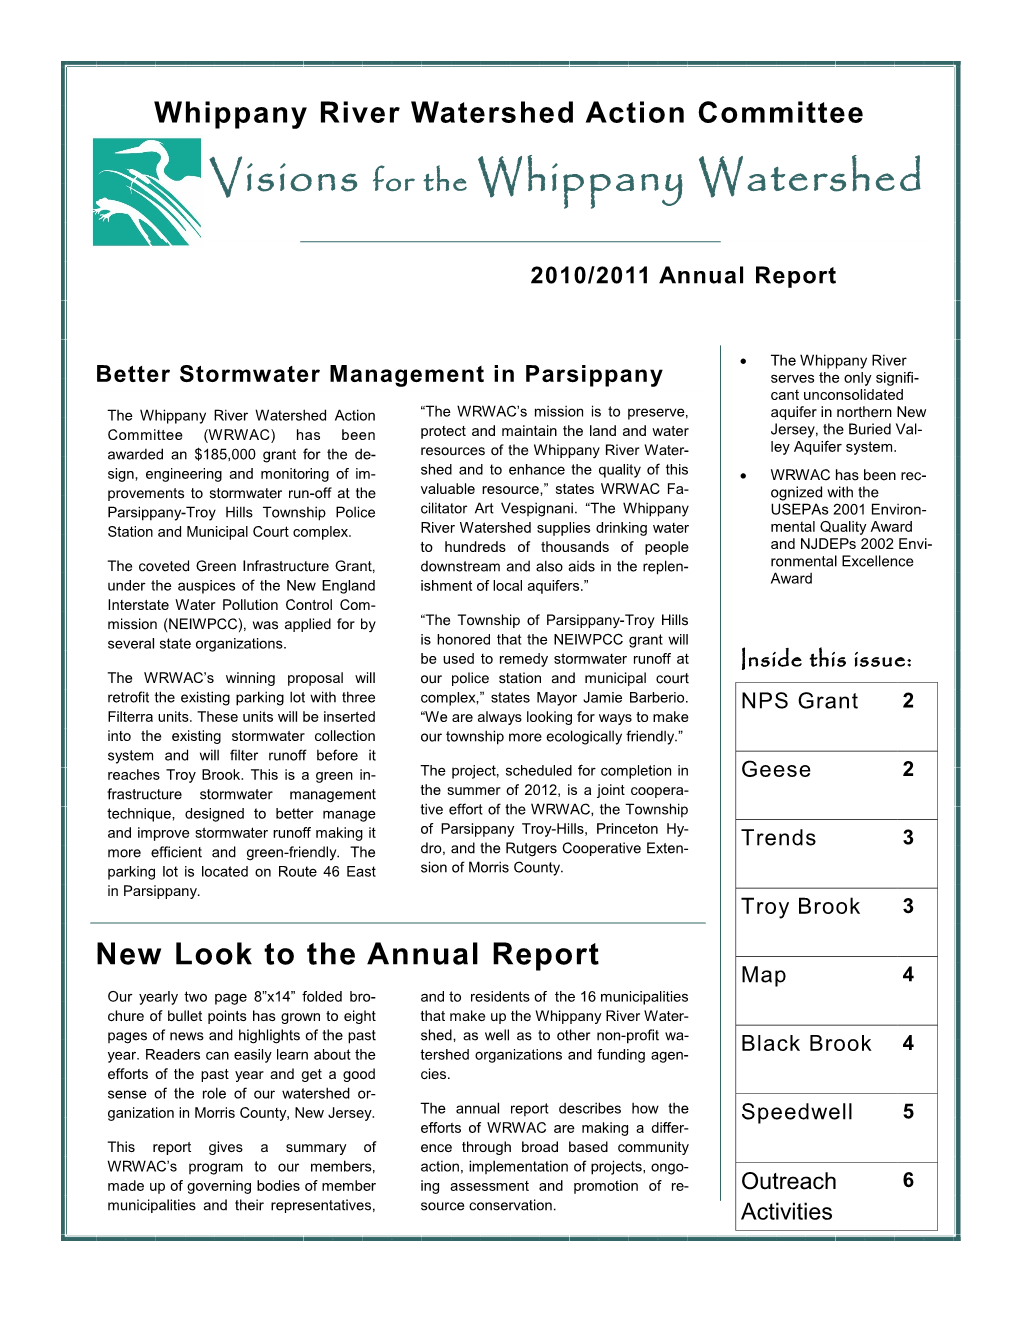 Visions for the Whippany Watershed